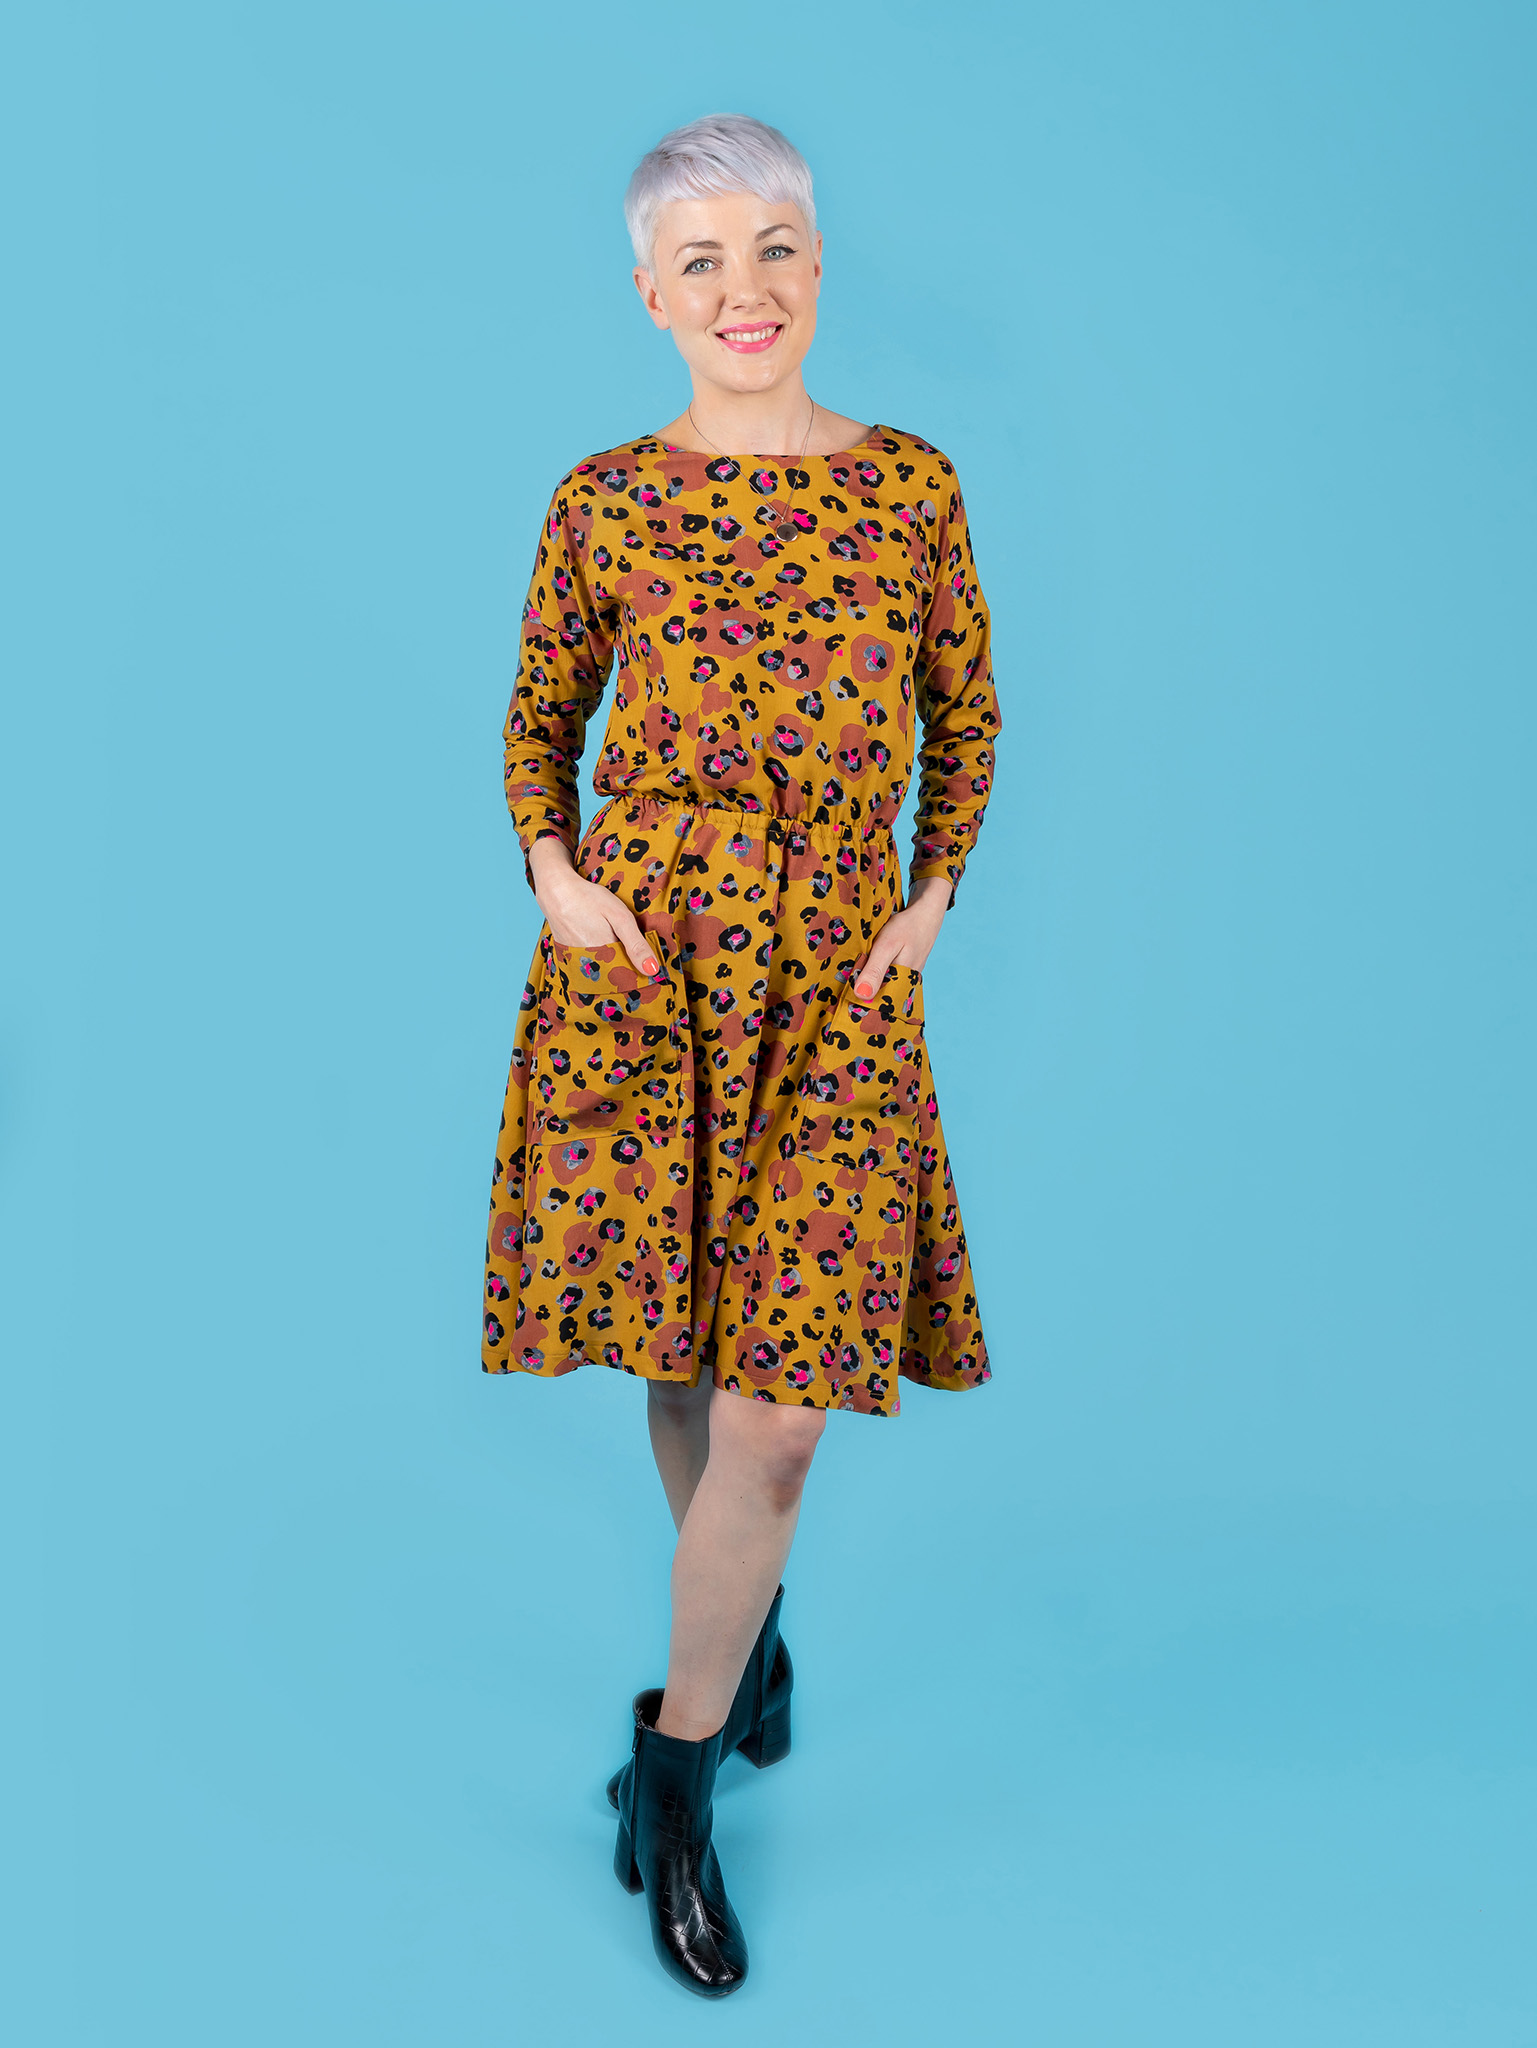 Tilly and the Buttons: How to Lengthen or Shorten a Sewing Pattern